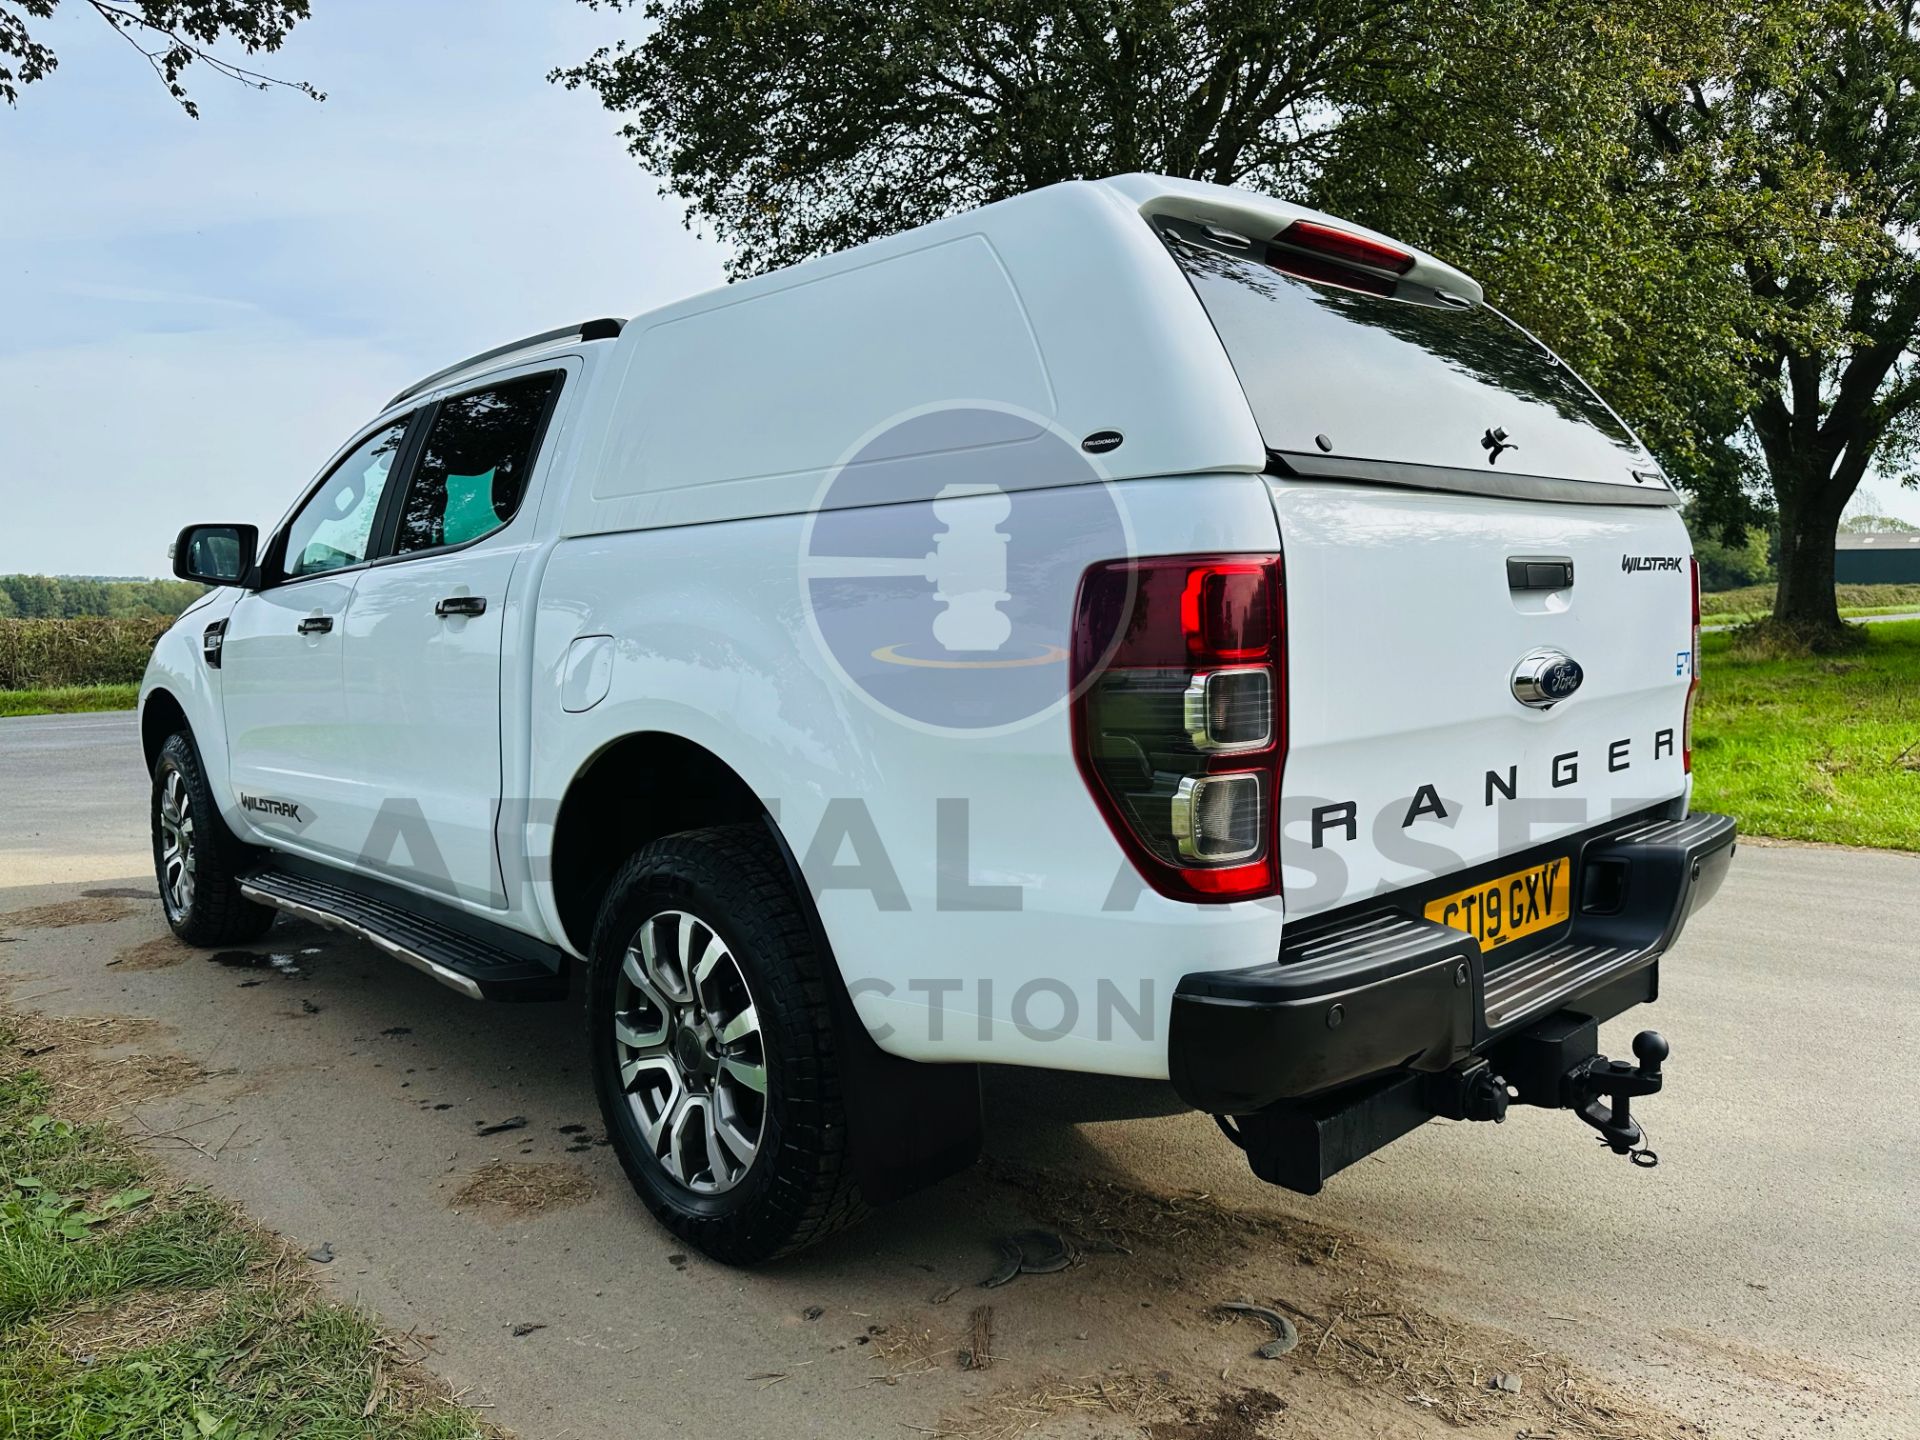 (ON SALE) FORD RANGER "WILDTRAK" 3.2TDCI (200) AUTO-START/STOP - D/CAB - 19 REG - 1 OWNER - LEATHER - Image 11 of 39